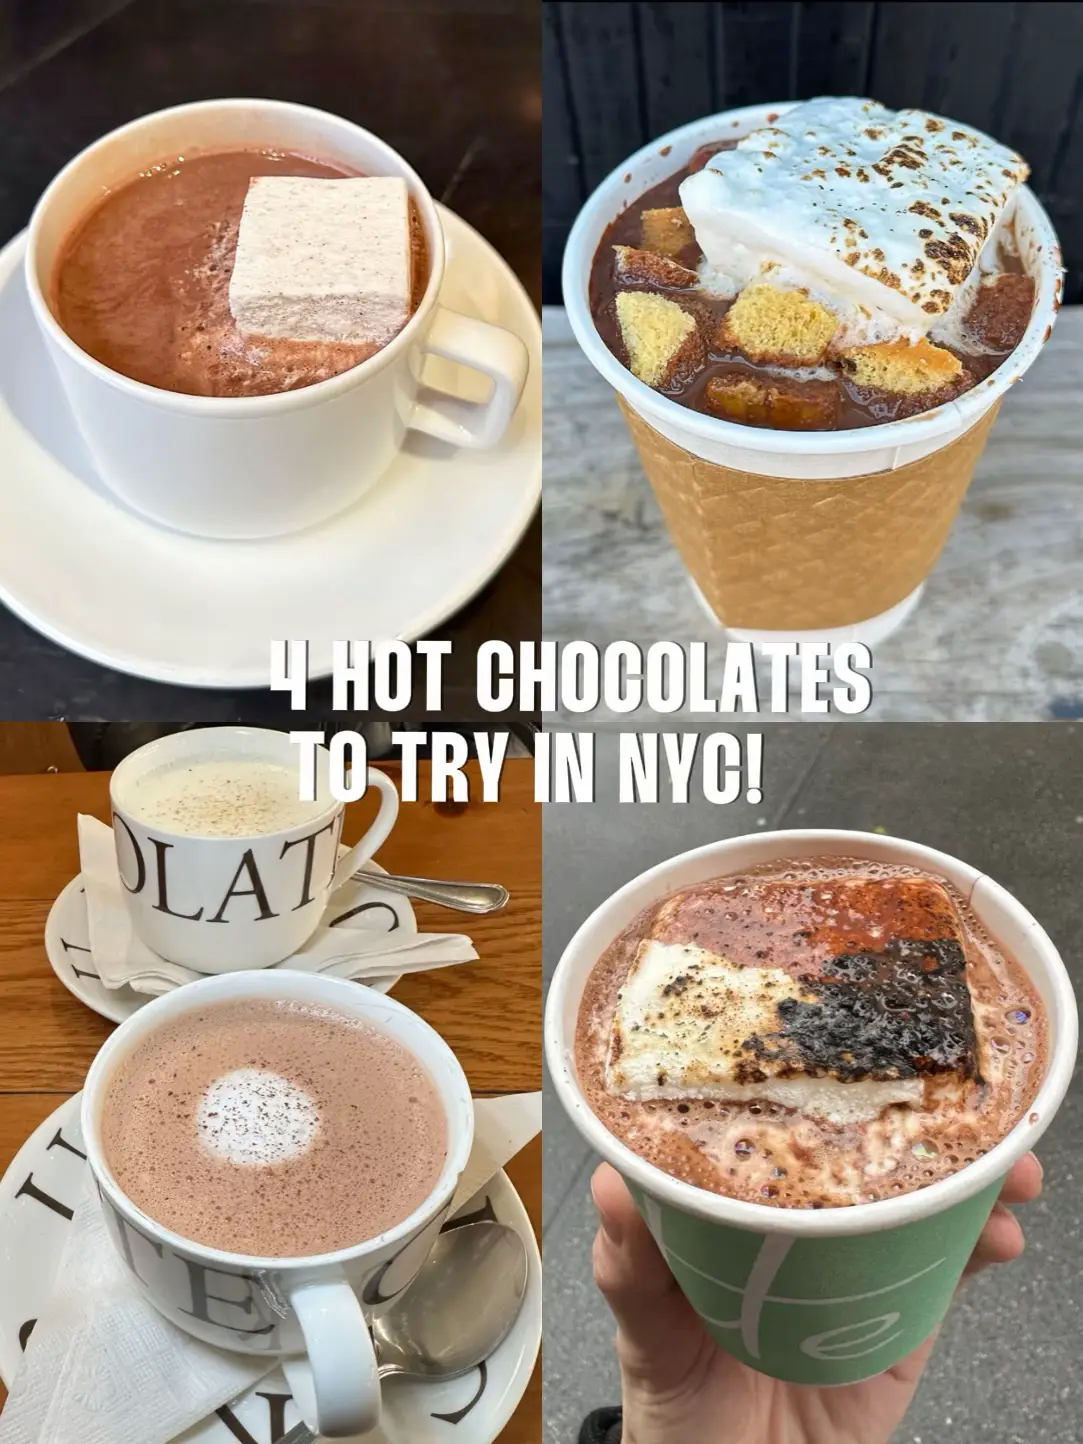 4 Hot Chocolates to Try in NYC's images